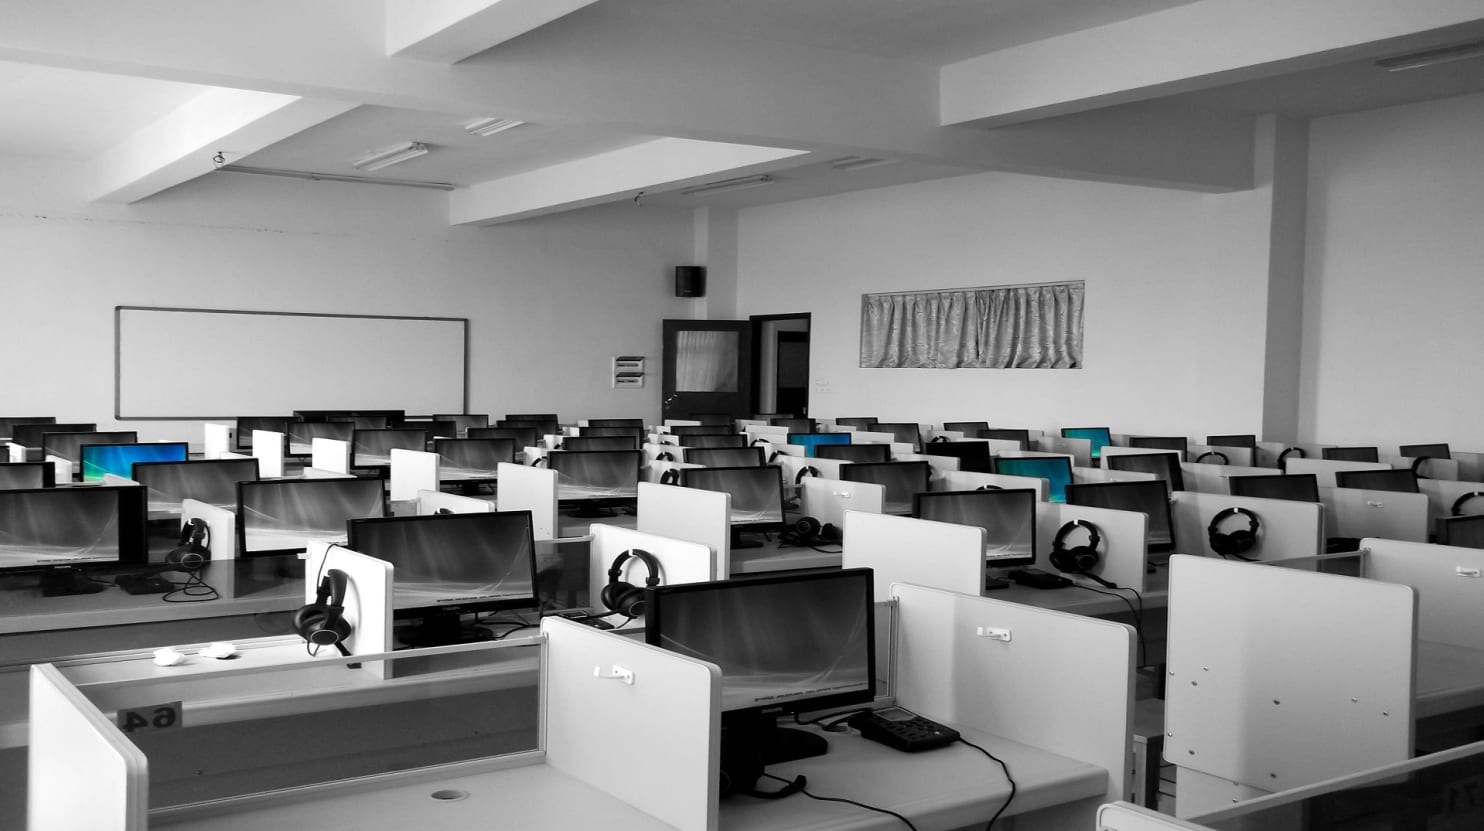 Personalize the digital workplace - and it won't feel like these rows of cubicles.